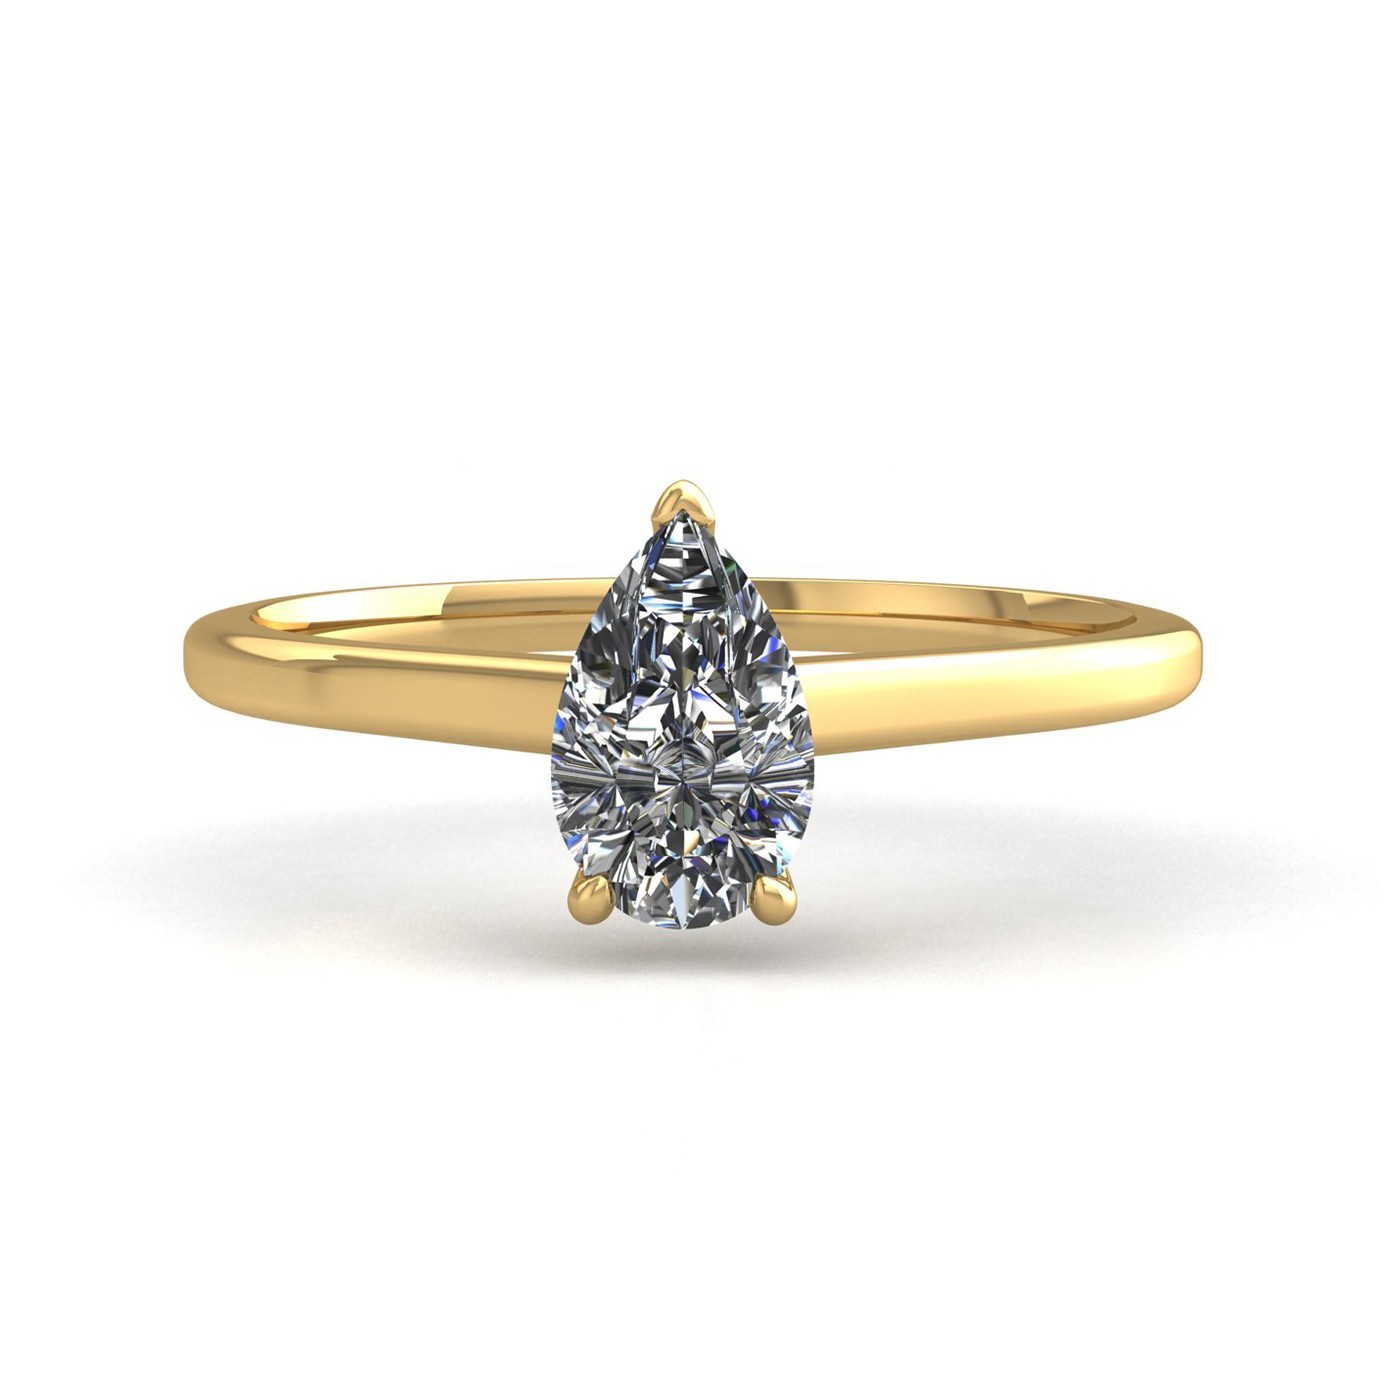 18k yellow gold  1,00 ct 3 prongs solitaire pear cut diamond engagement ring with whisper thin band Photos & images